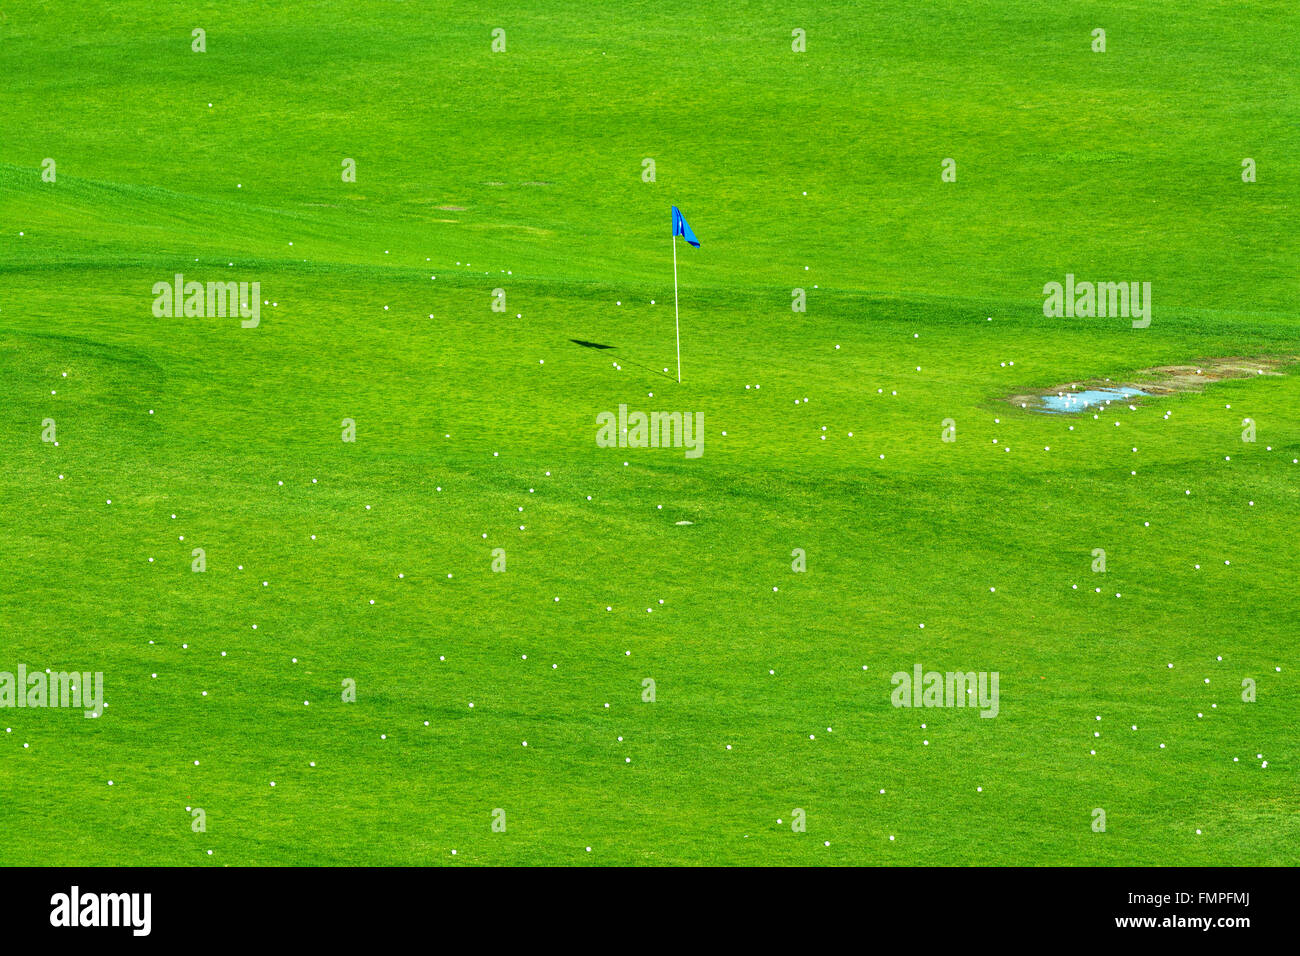 Early morning sunlight brings out the vibrant green colors of a golf course sprinkled with golf balls around a target flag Stock Photo